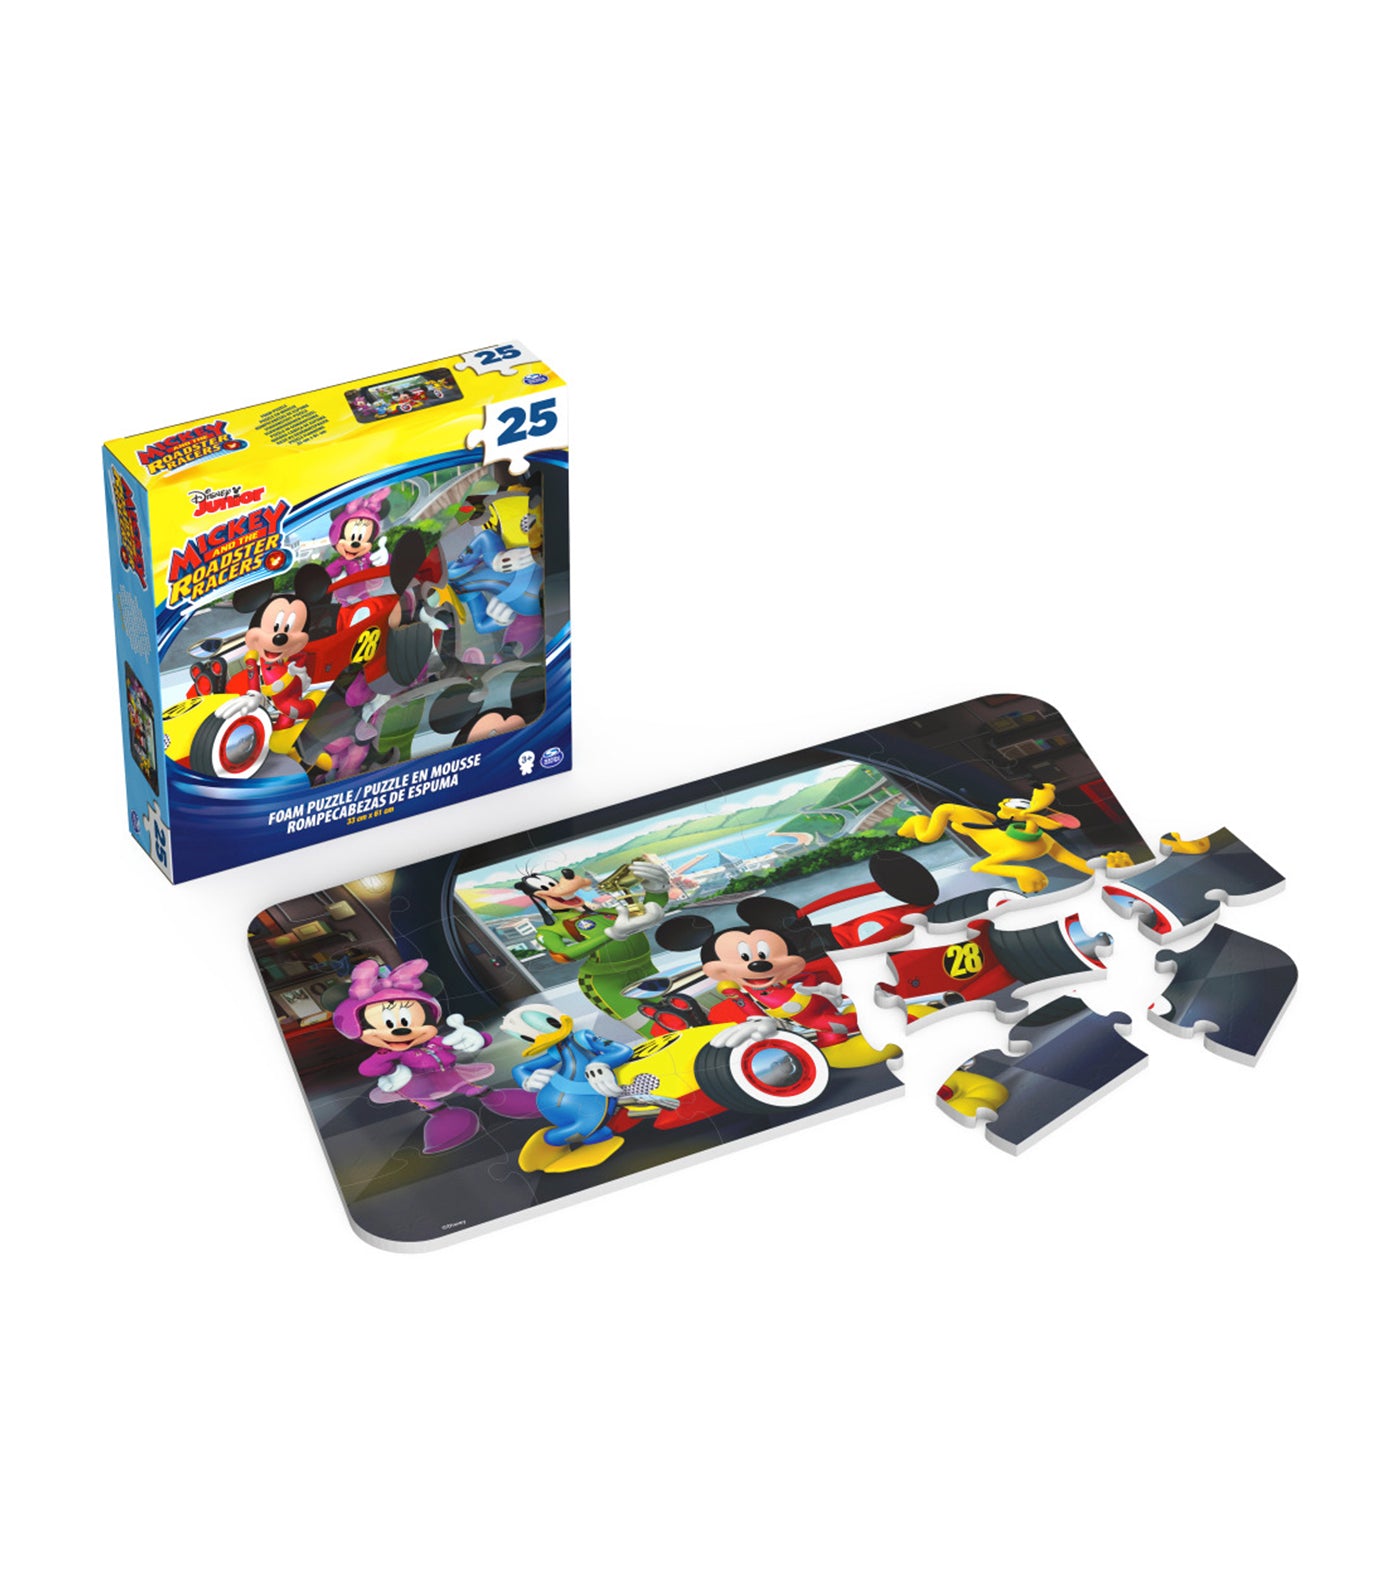 Mickey Mouse and the Roadstar Racers 25-Piece Foam Puzzle